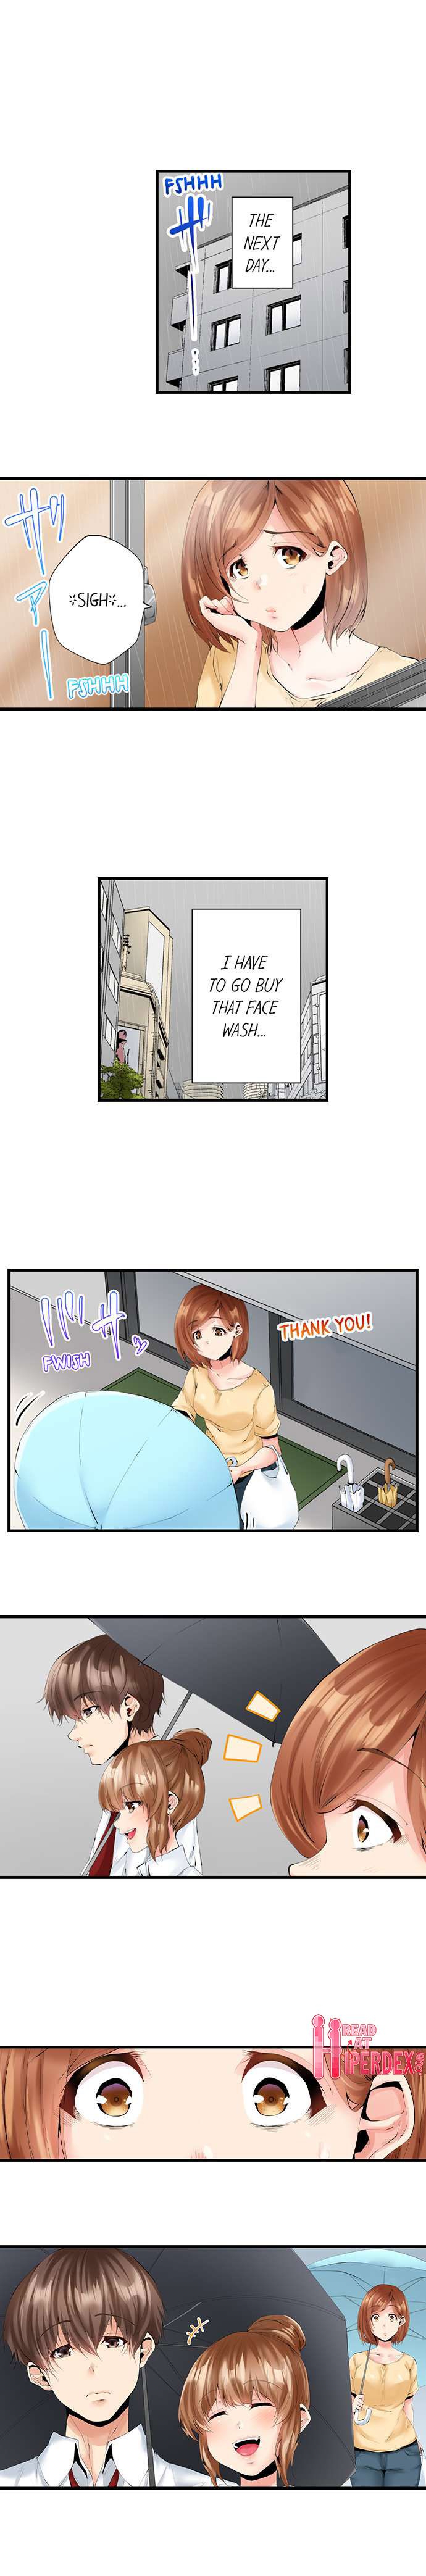 A Rebellious Girl's Sexual Instruction by Her Teacher - Chapter 7 Page 9